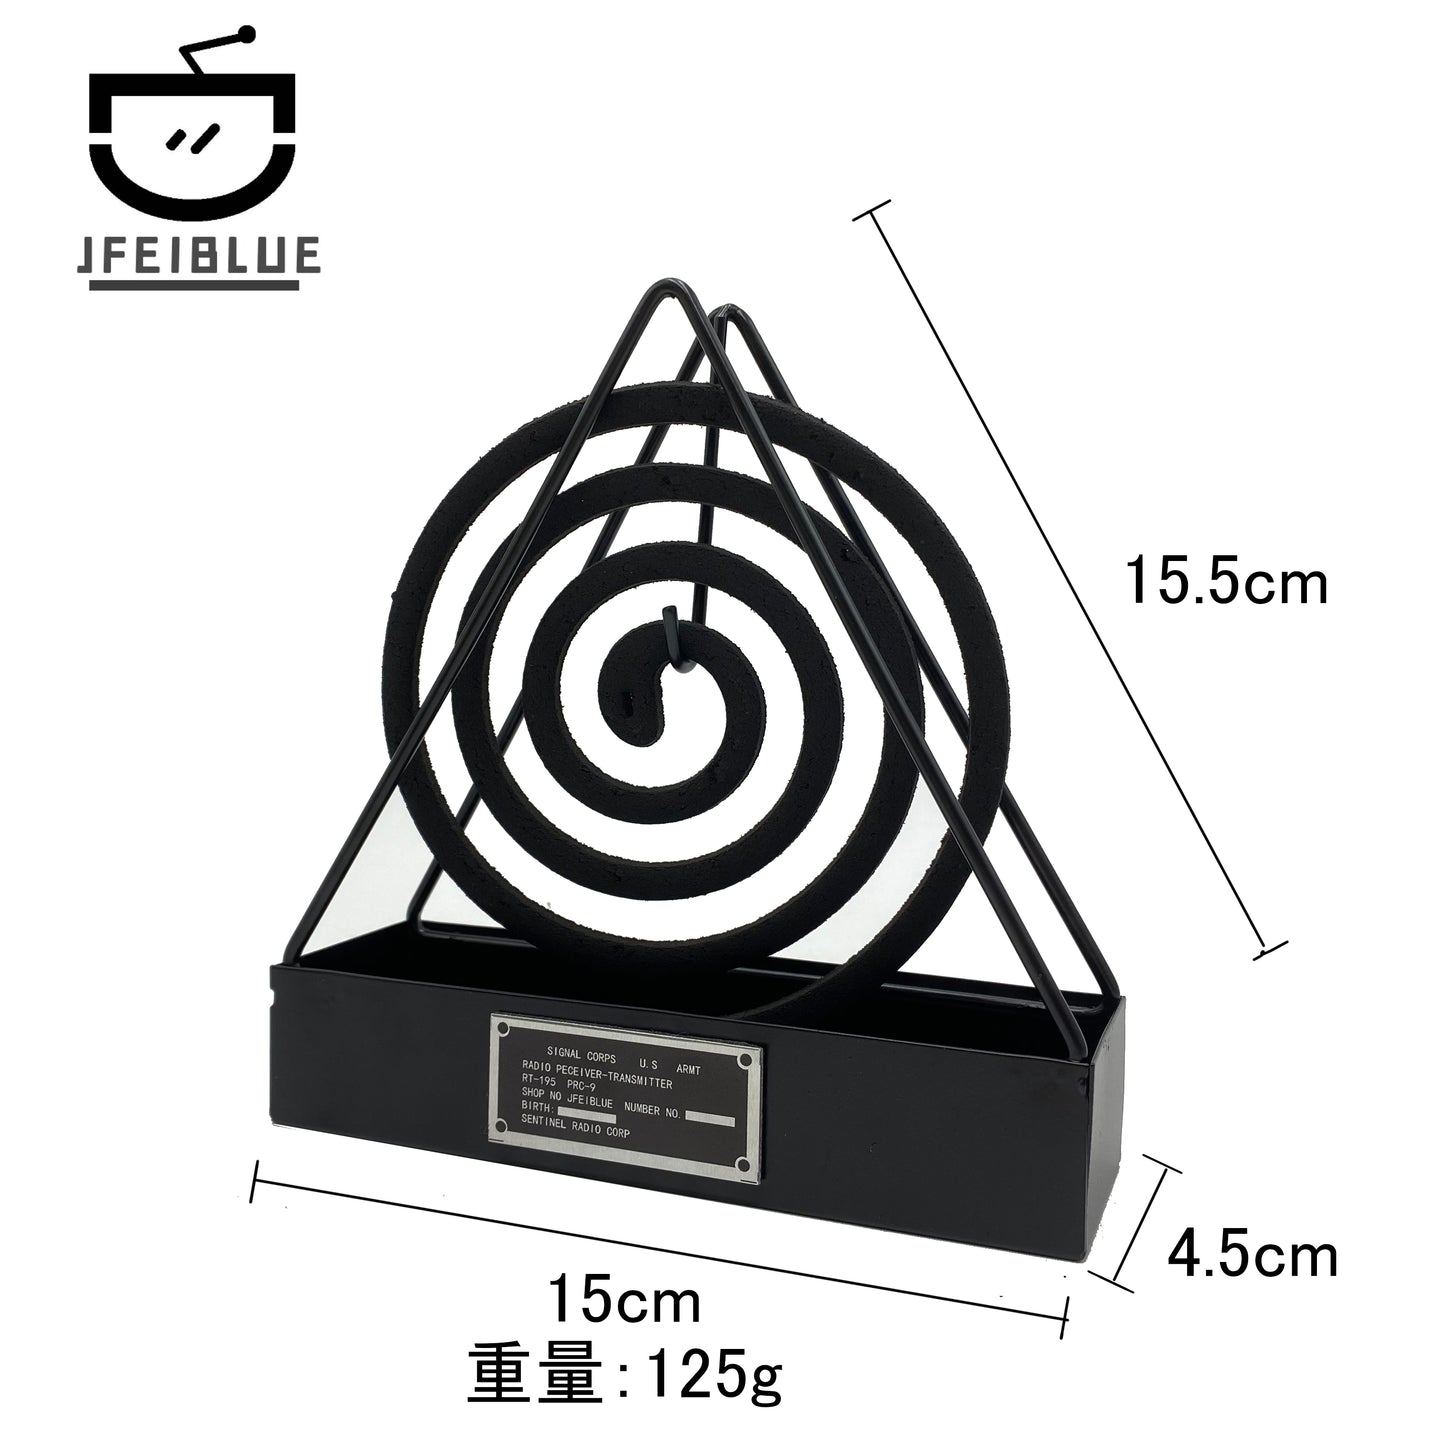 JFEIBLUE Outdoor mosquito repellent portable mosquito coils mosquito coil tray bracket for camping fishing safety hanging type